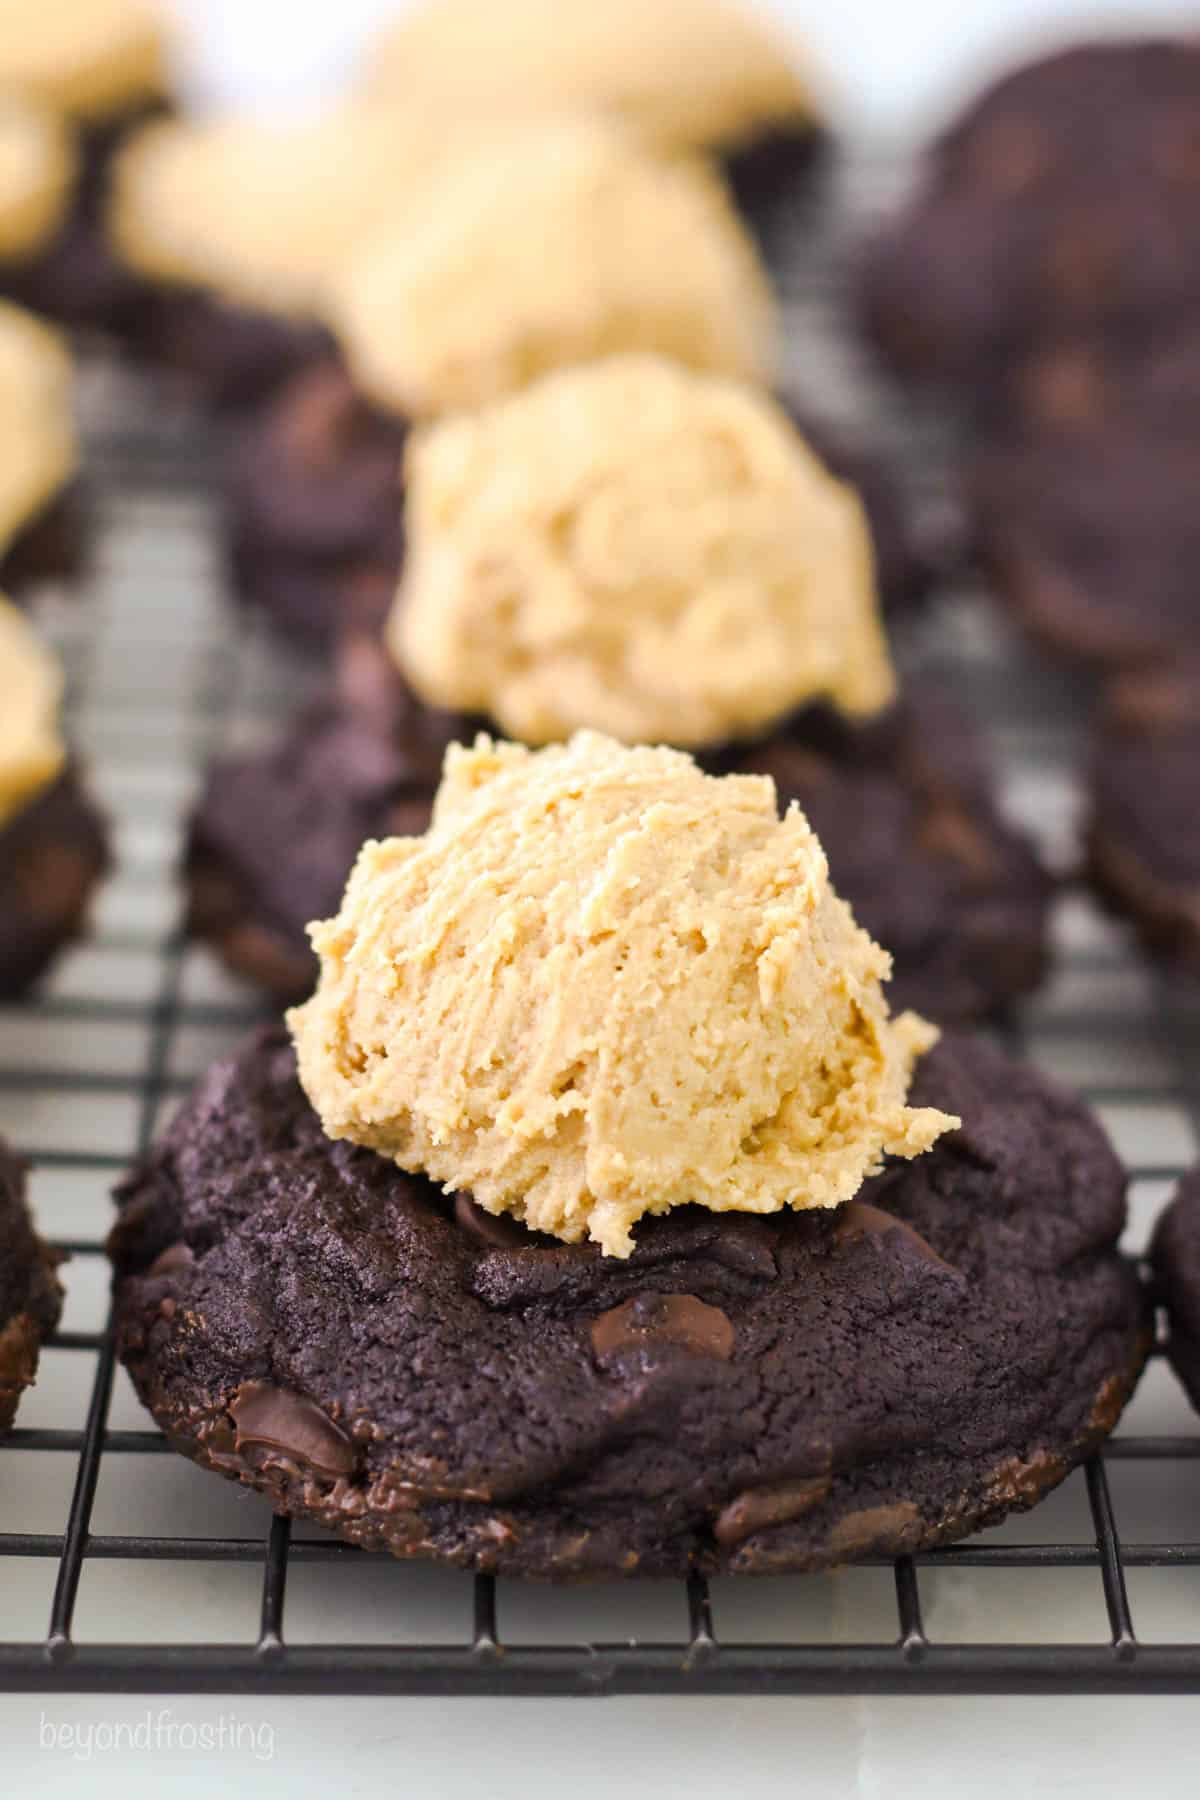 Chocolate cookies topped with peanut butter filling